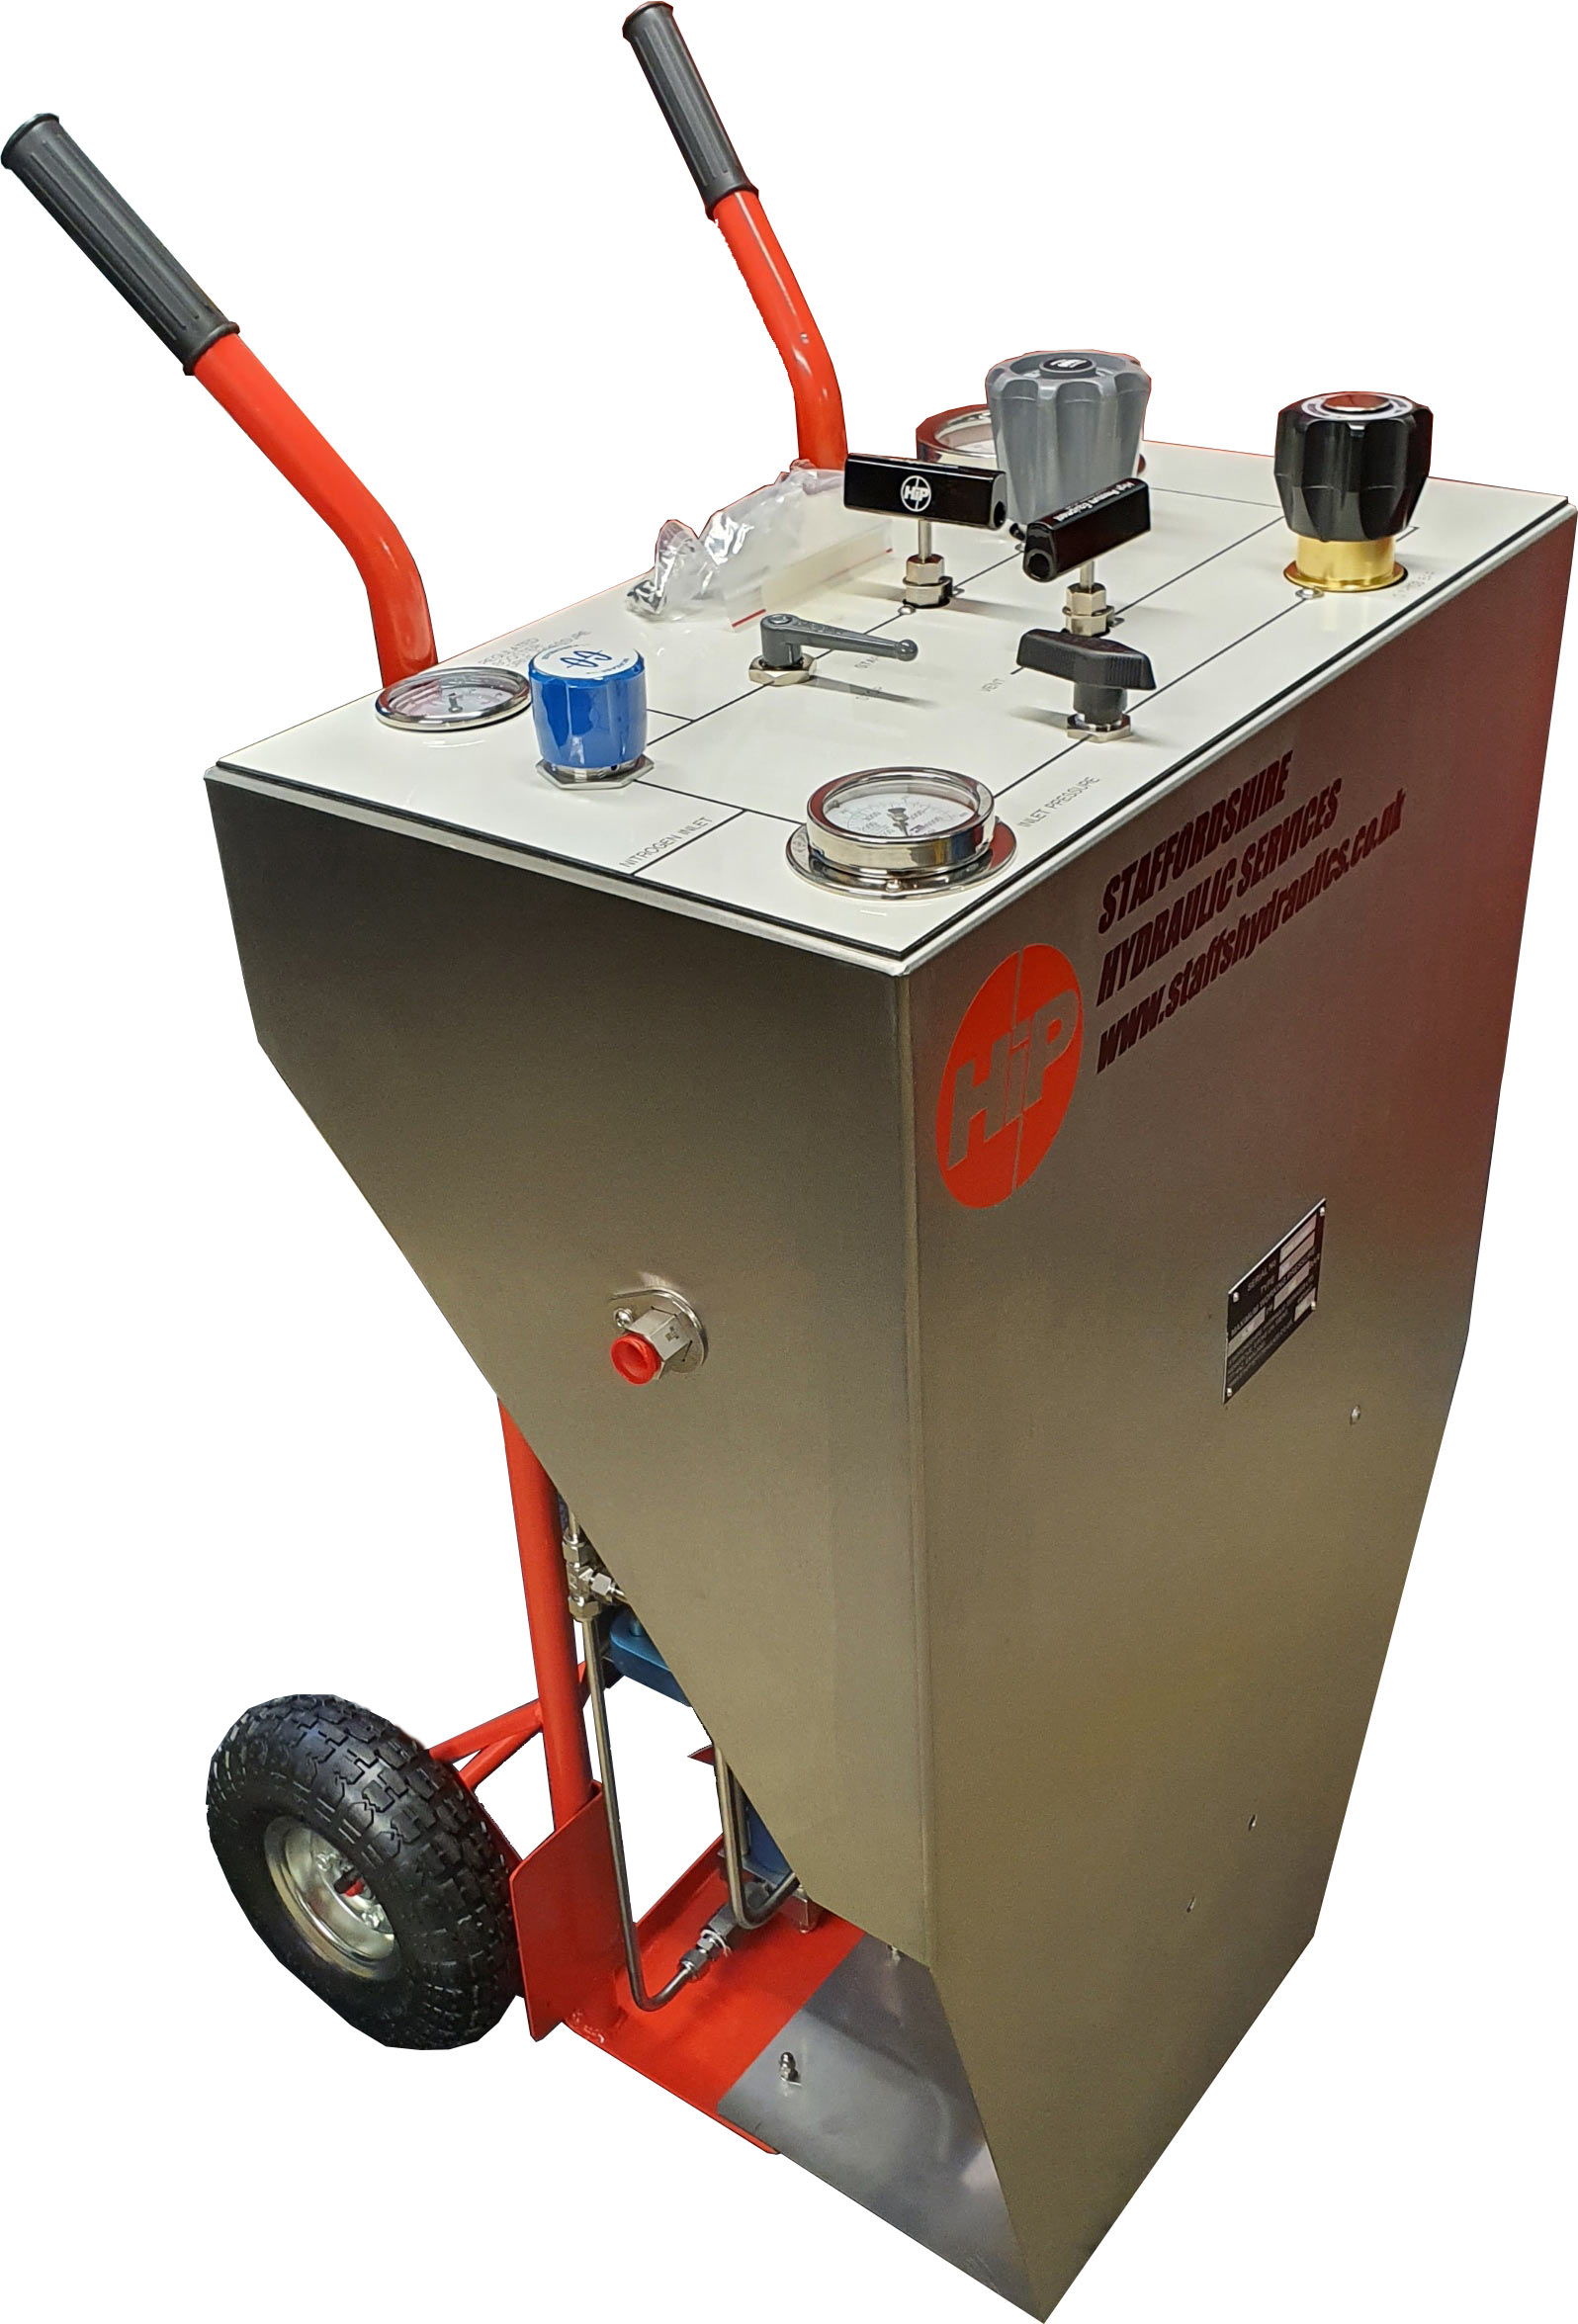 New Portable Gas Booster System from High Pressure Equipment